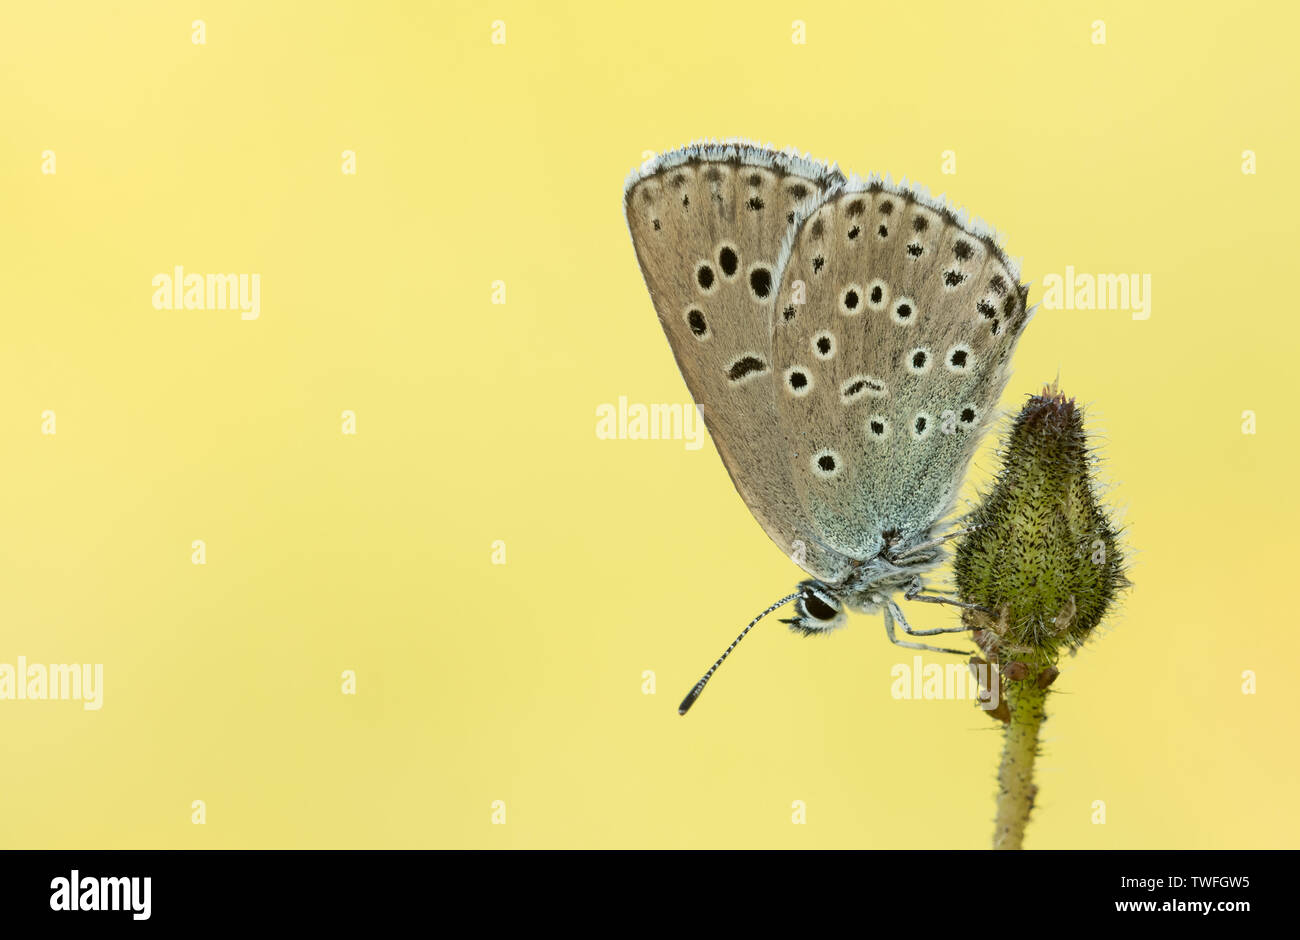 A Large Blue butterfly (Phengaris arion) roosting during the early morning with its wings closed on a flowerhead at Daneway Banks, Gloucestershire Stock Photo